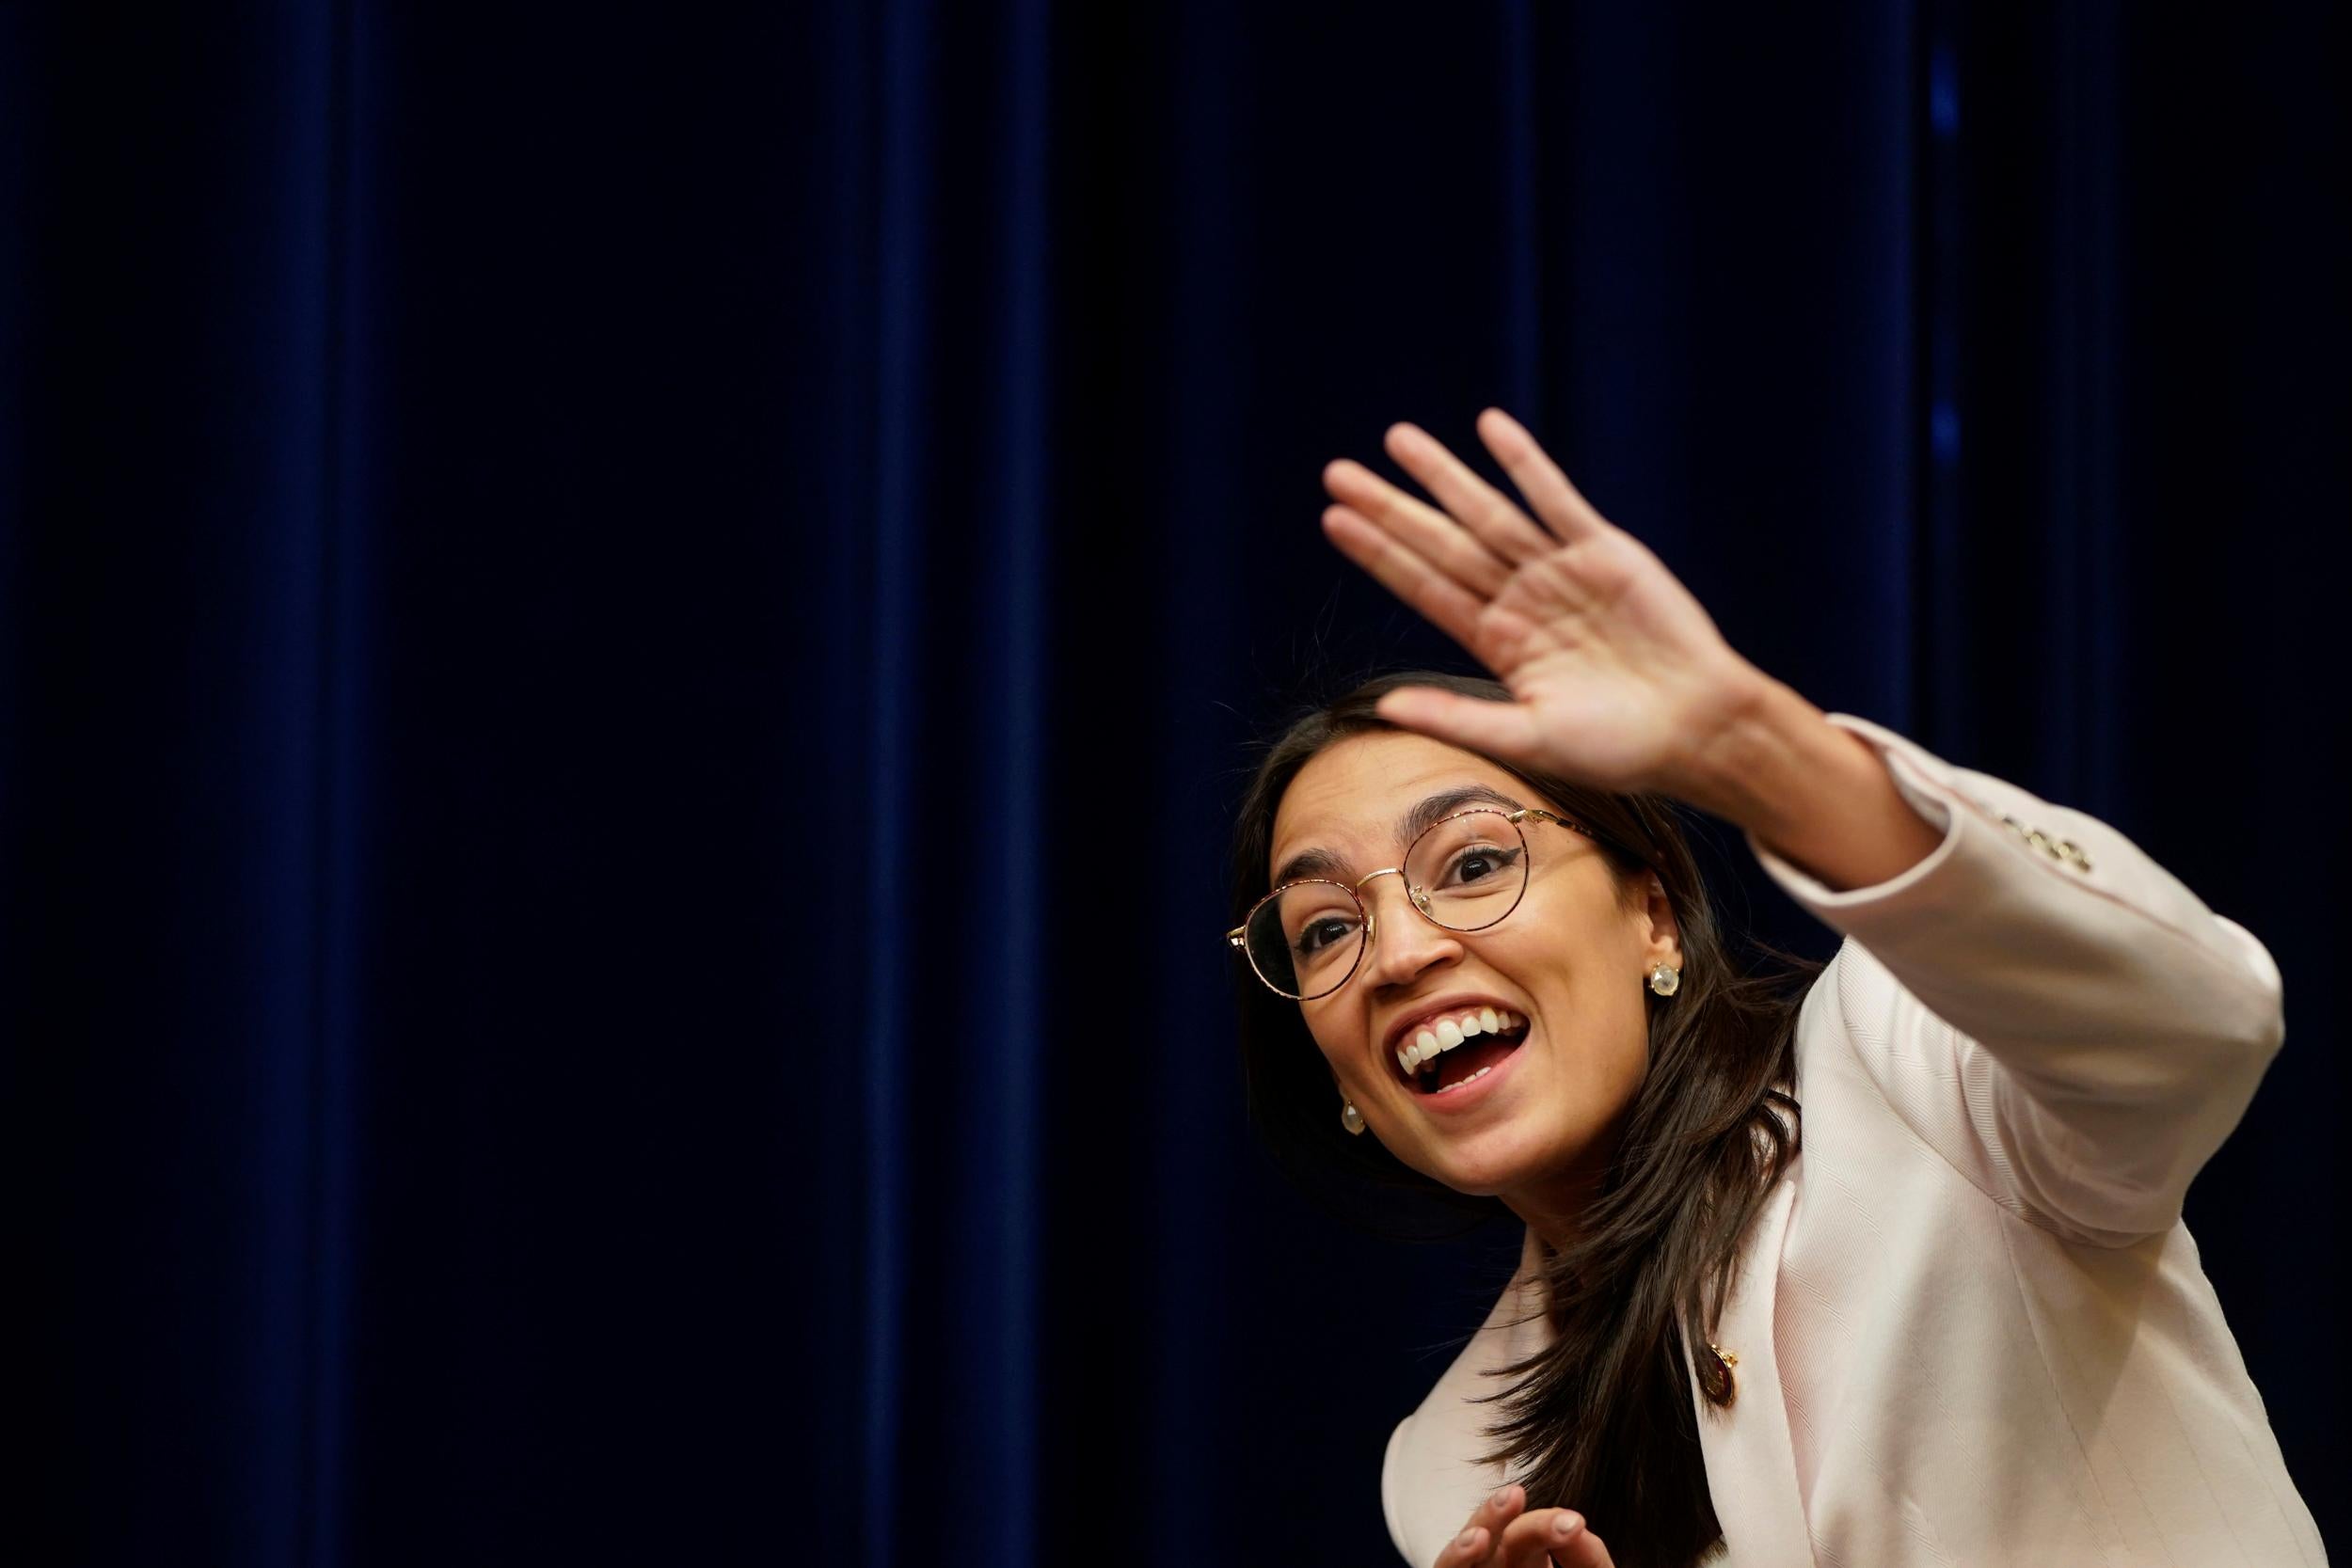 Baseball team that aired video calling AOC an 'enemy of freedom' loses major sponsor